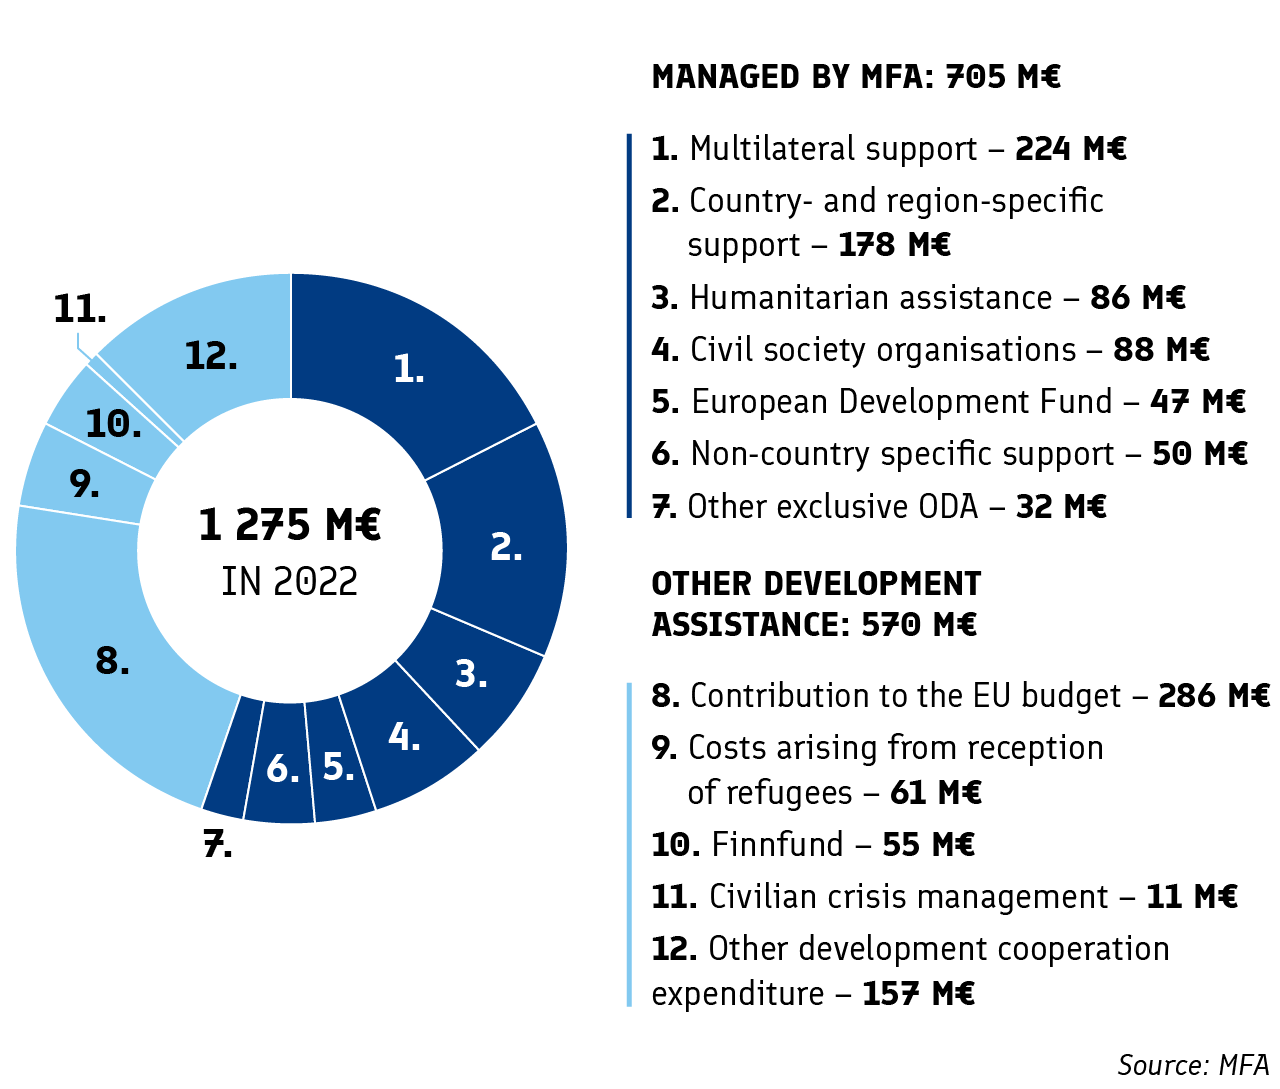 Appropriations managed by the MFA: 705 million euros. This includes multilateral support 224 million, country and region specific support 178 million, humanitarian assistance 86 million, civil society organisations 88 million, European Development Fund 47 million, non-country specific support 50 million, and other exclusive ODA 32 million euroa. Other development assistance: 570 million euros. This includes contribution to the EU budget 286 million, costs arising from reception of refugees 61 million, Finnfund 55 million, civilian crisis management 11 million, and other development cooperation expenditures 157 million euroa. All appropriations in 2022: 1275 million euros.